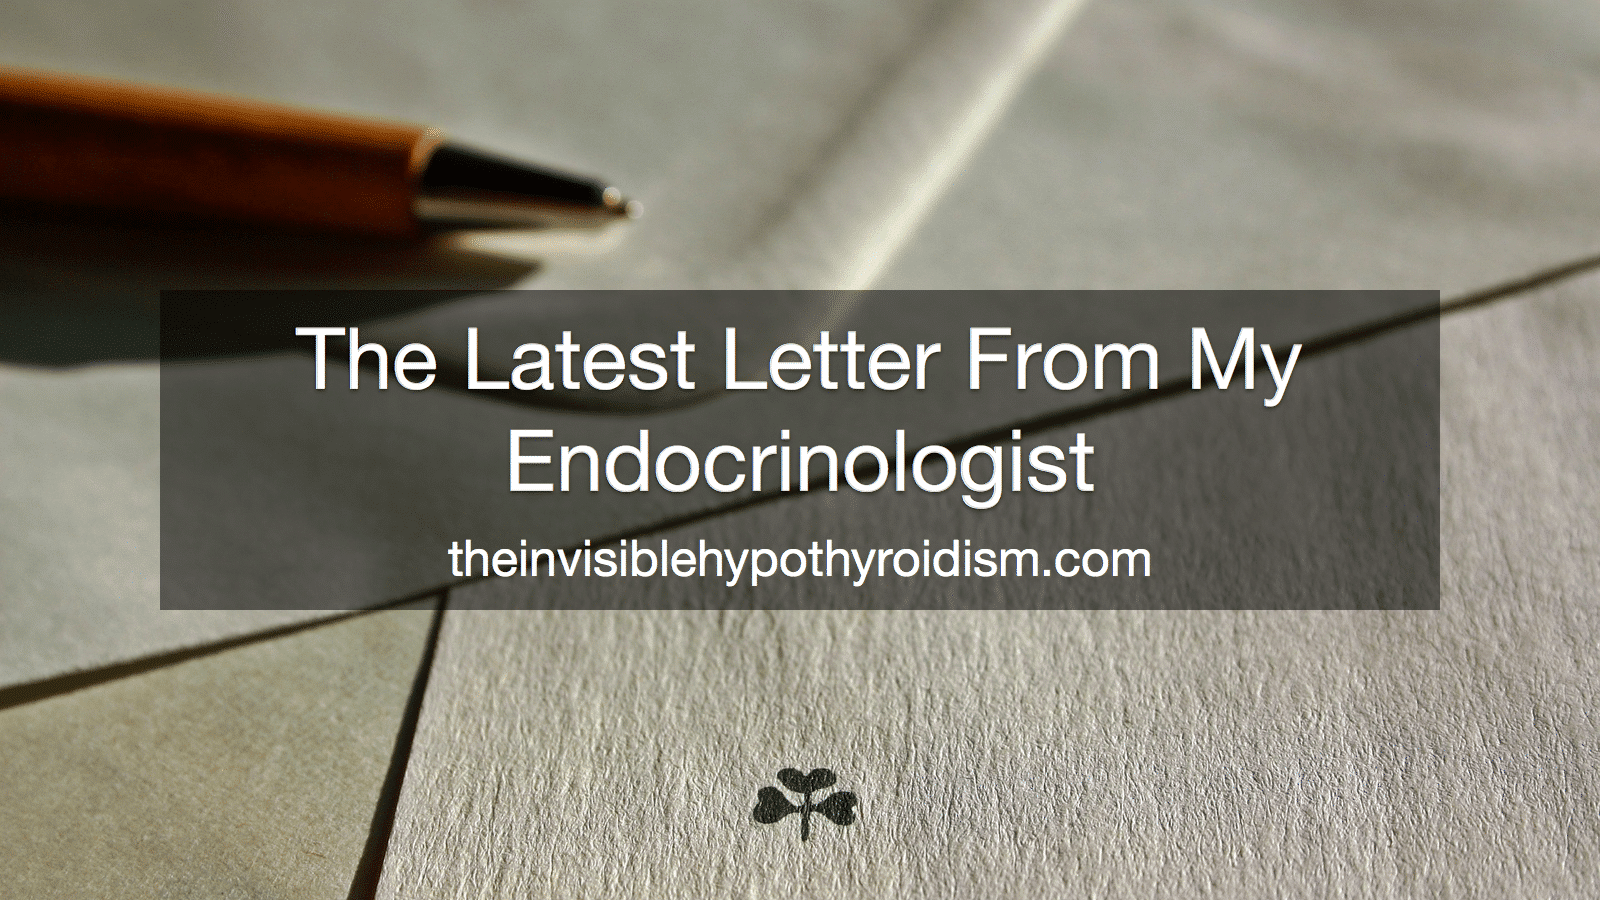 The Latest Letter From My Endocrinologist